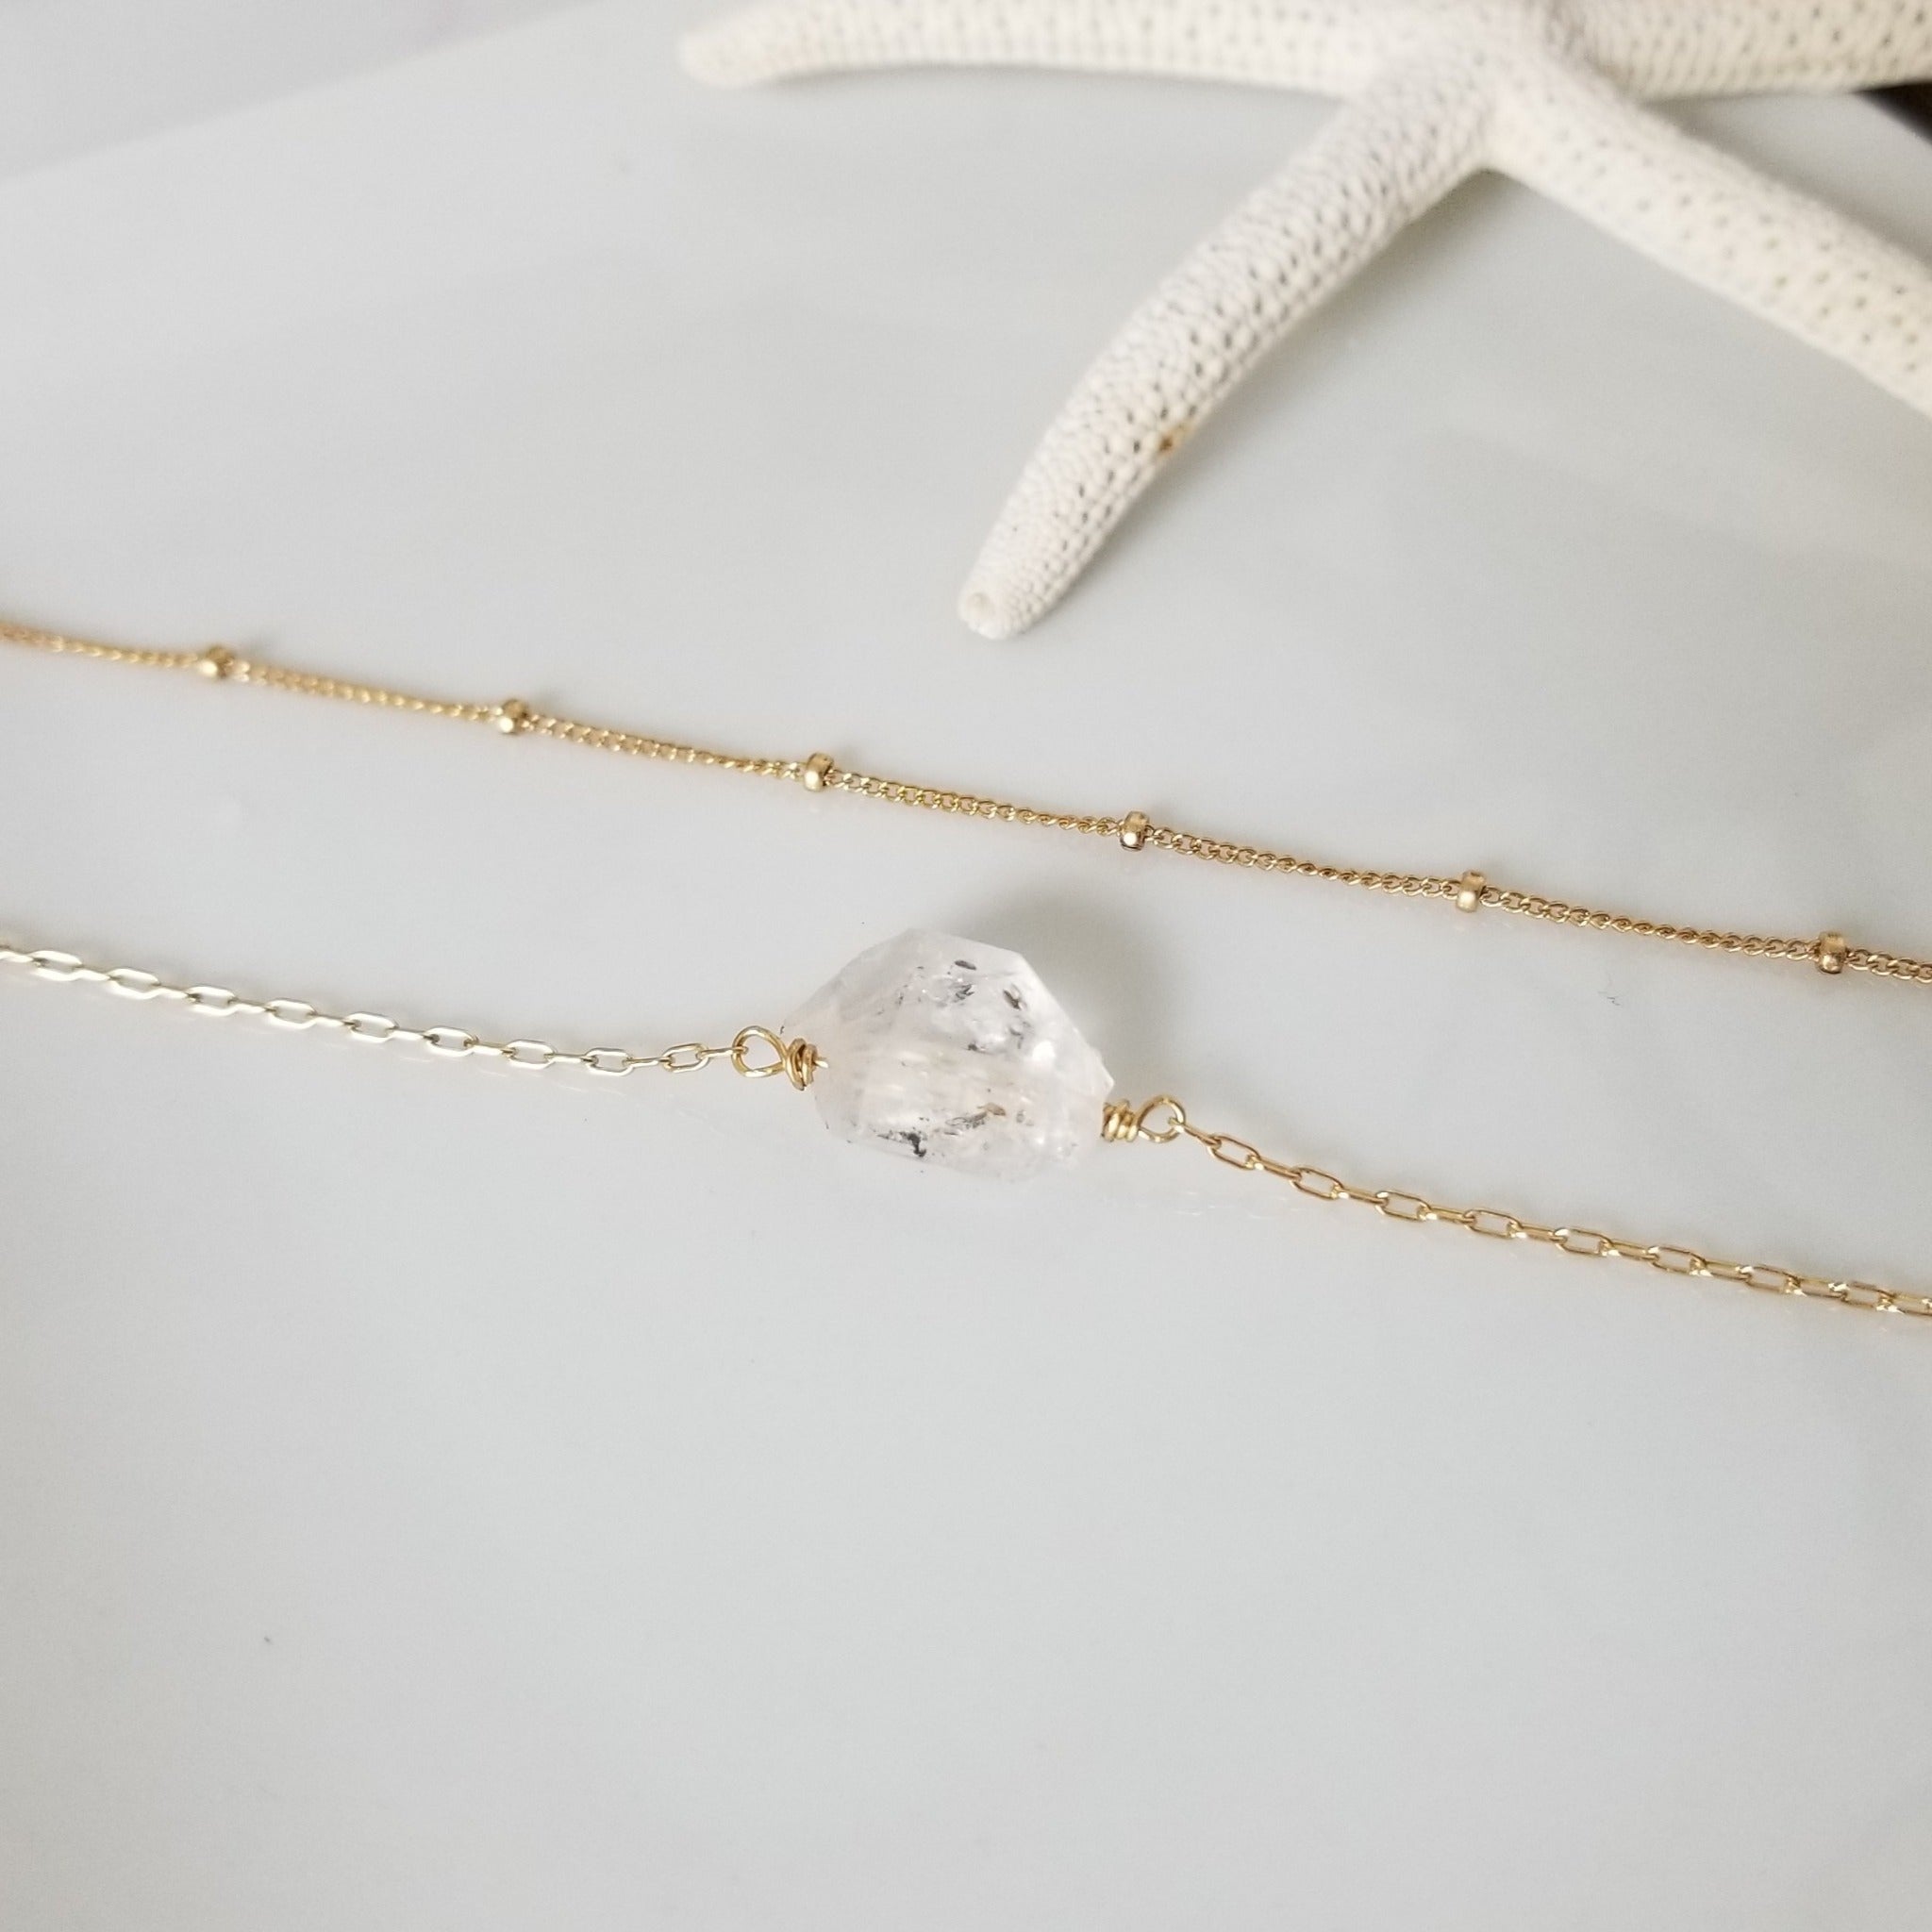 Herkimer Diamond or Raw Pearl Bracelet - Sterling Silver or Gold